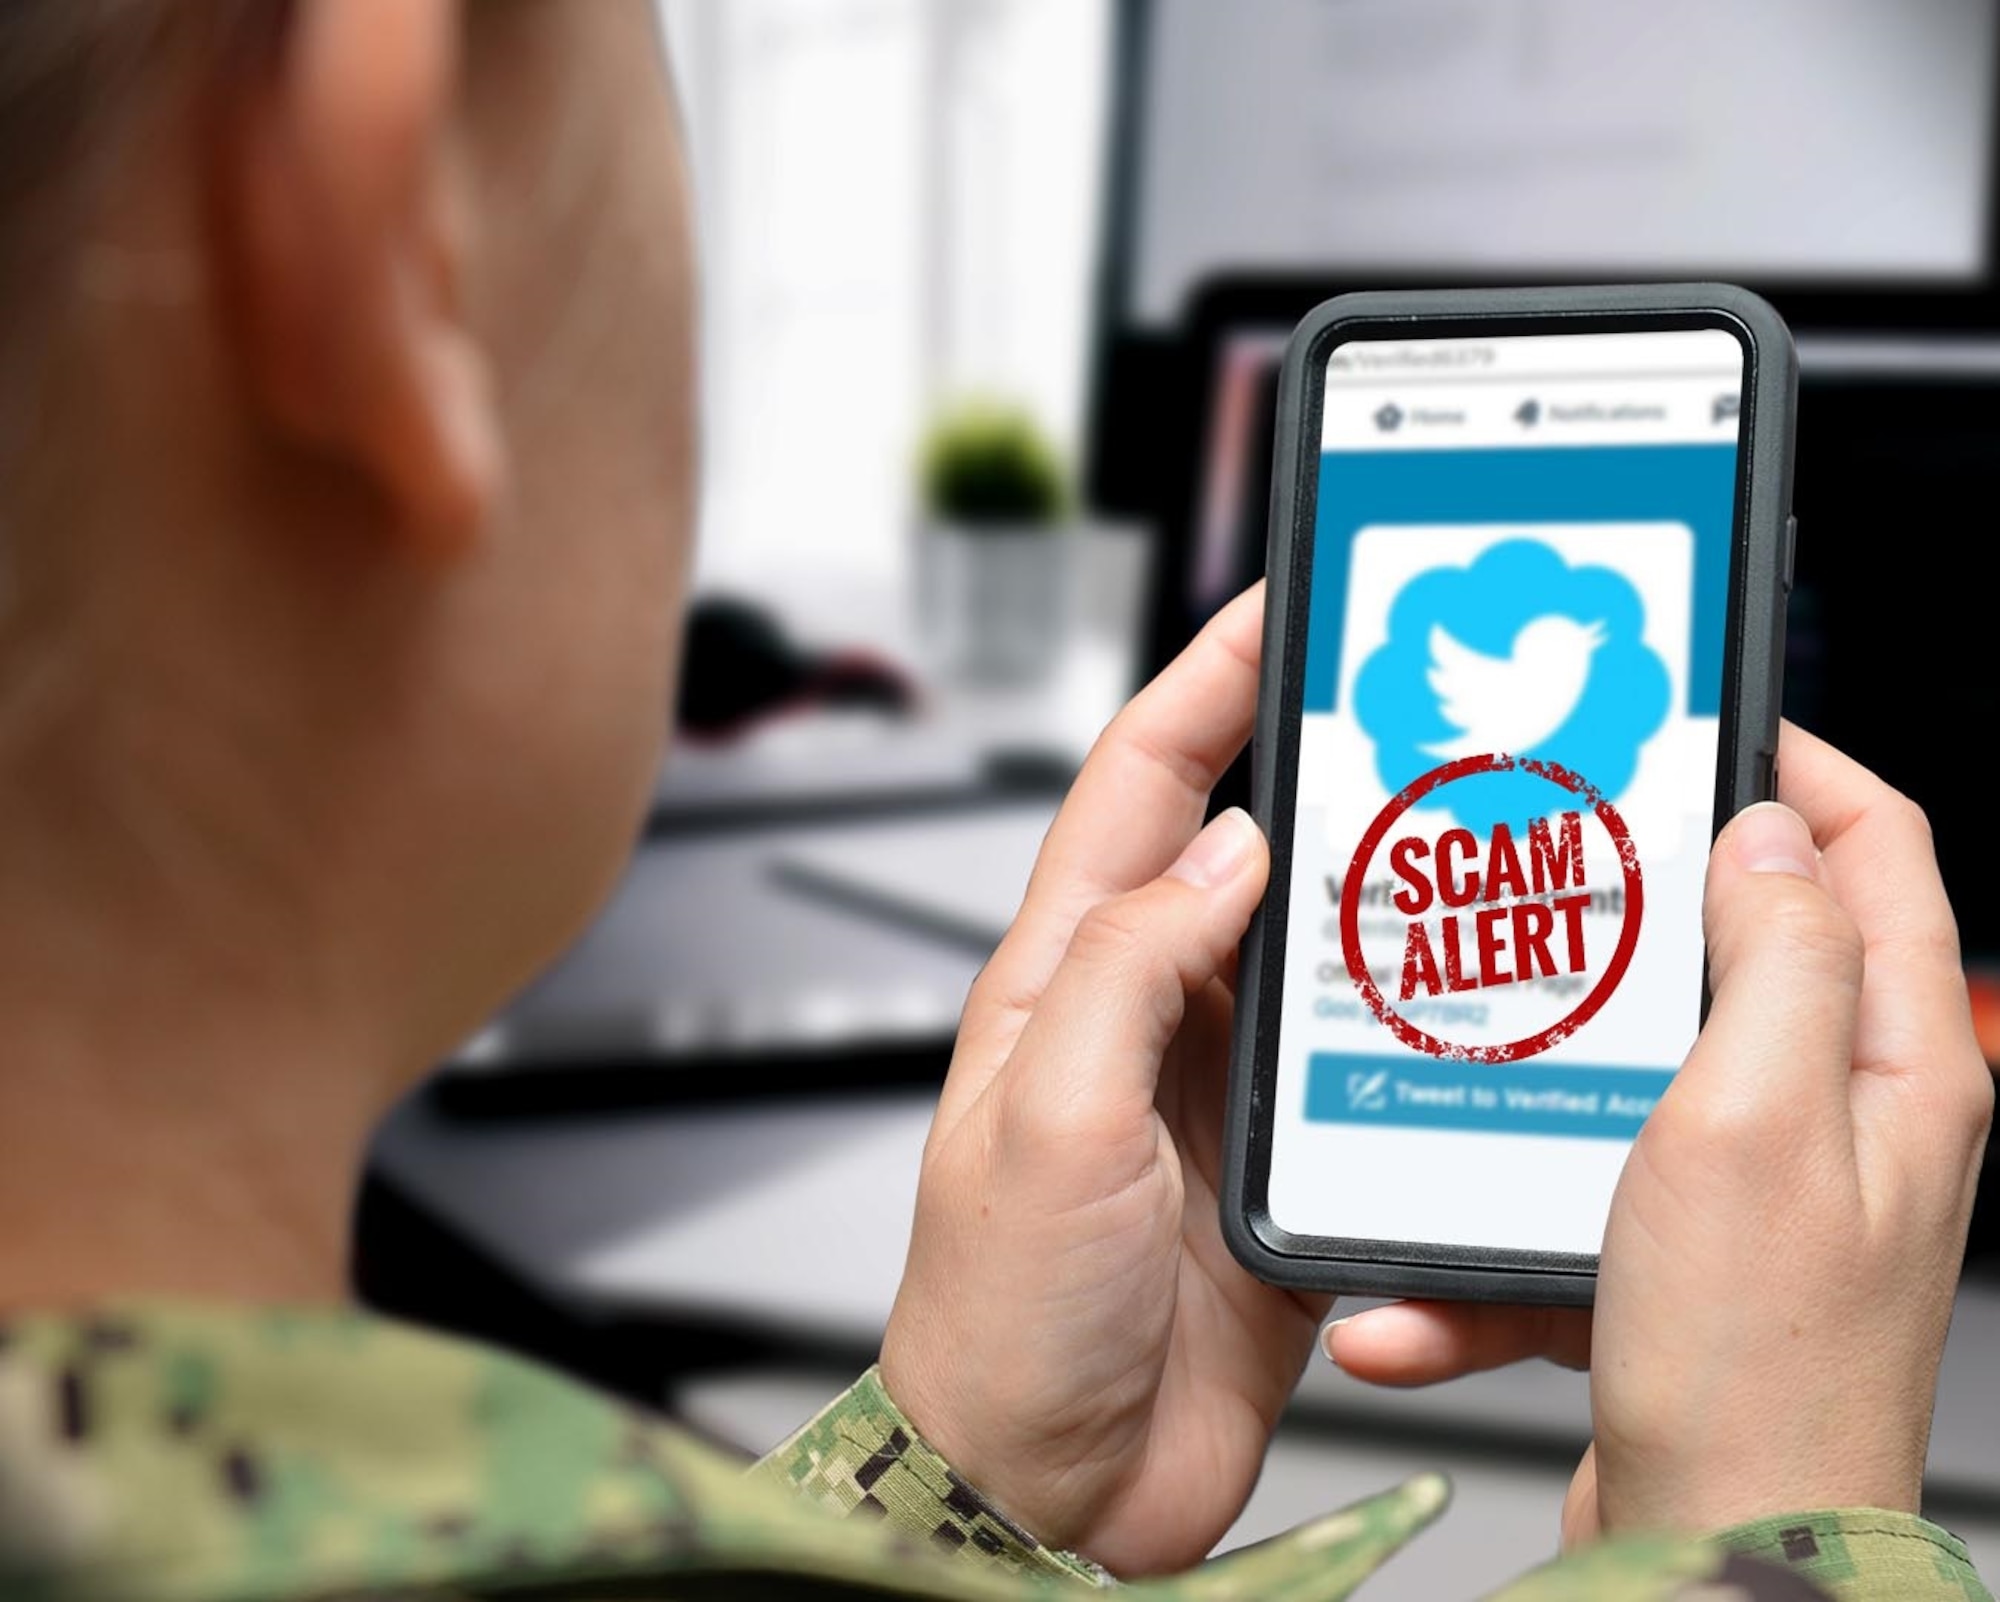 Military experts are constantly warning service members about social media scams that can affect them and their families.